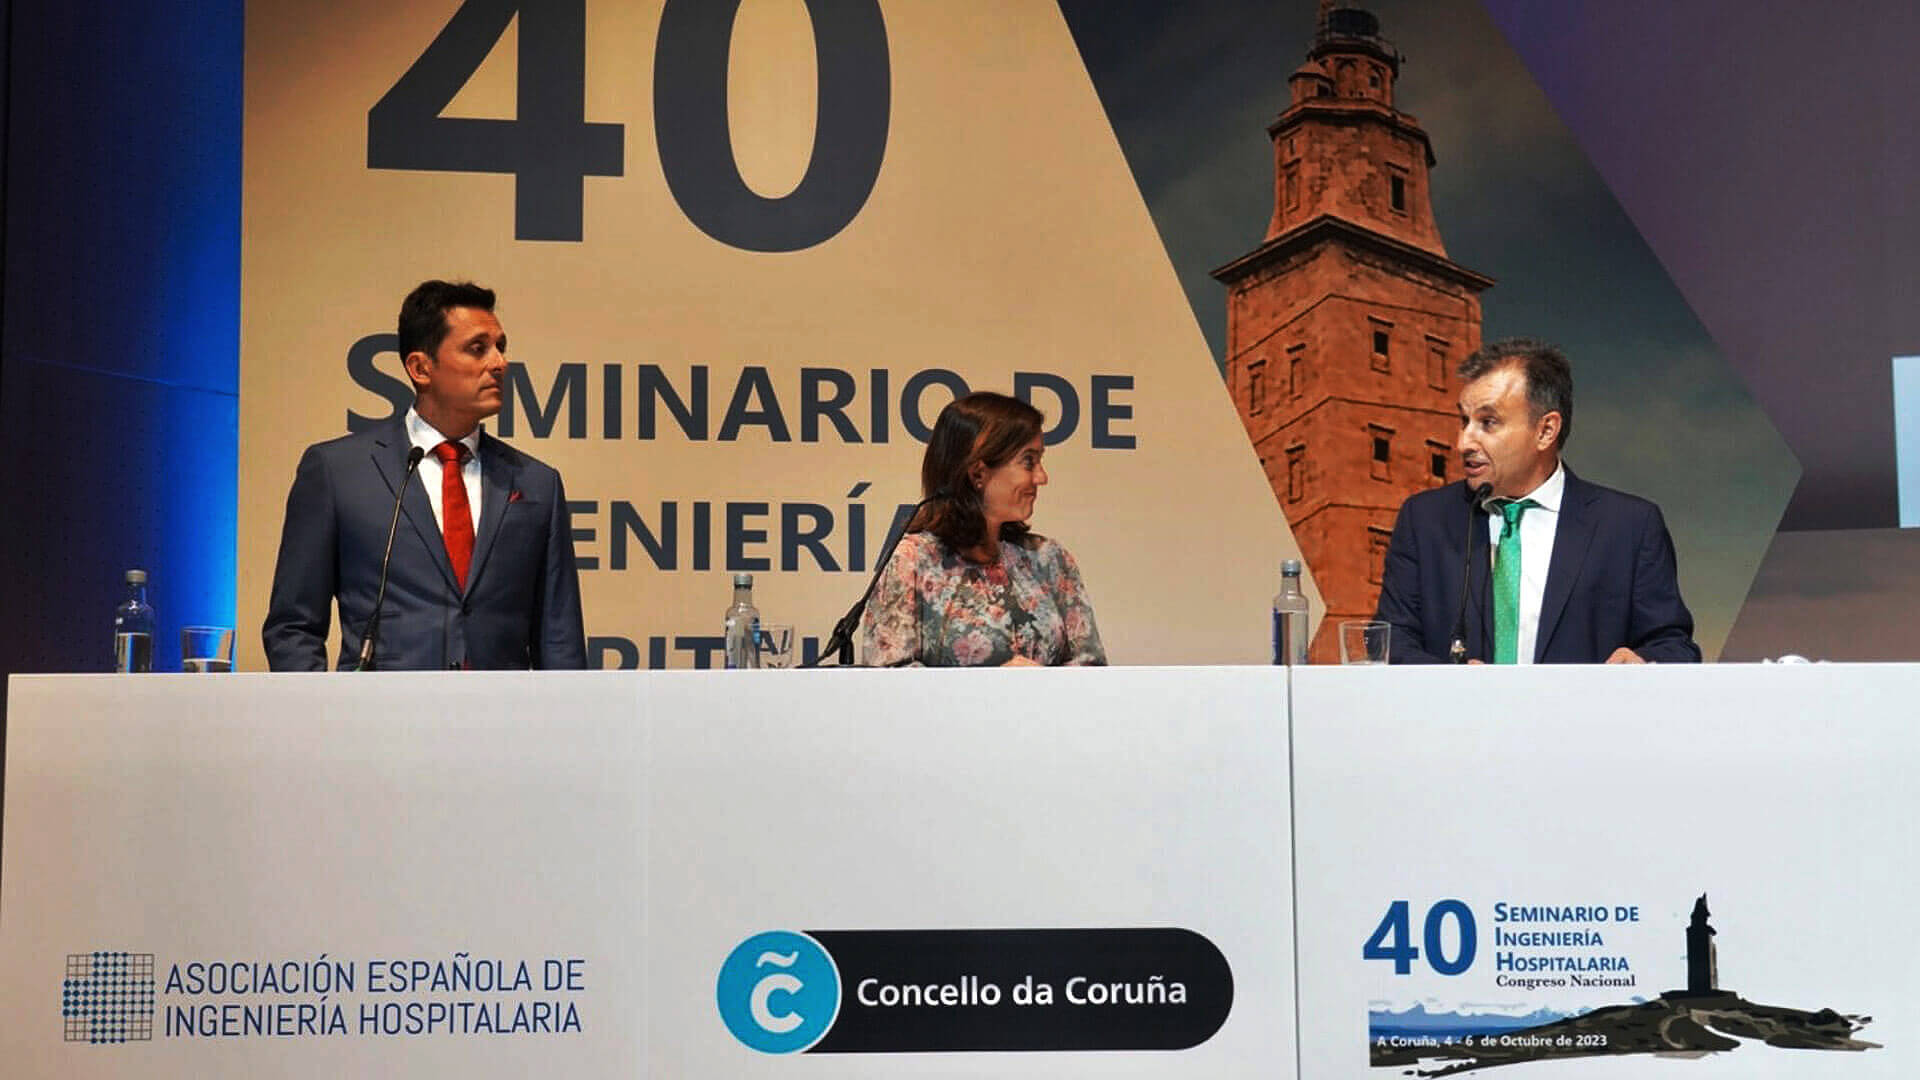 The 40th Congress of Hospital Engineering exceeds any forecast with 1,500 attendees